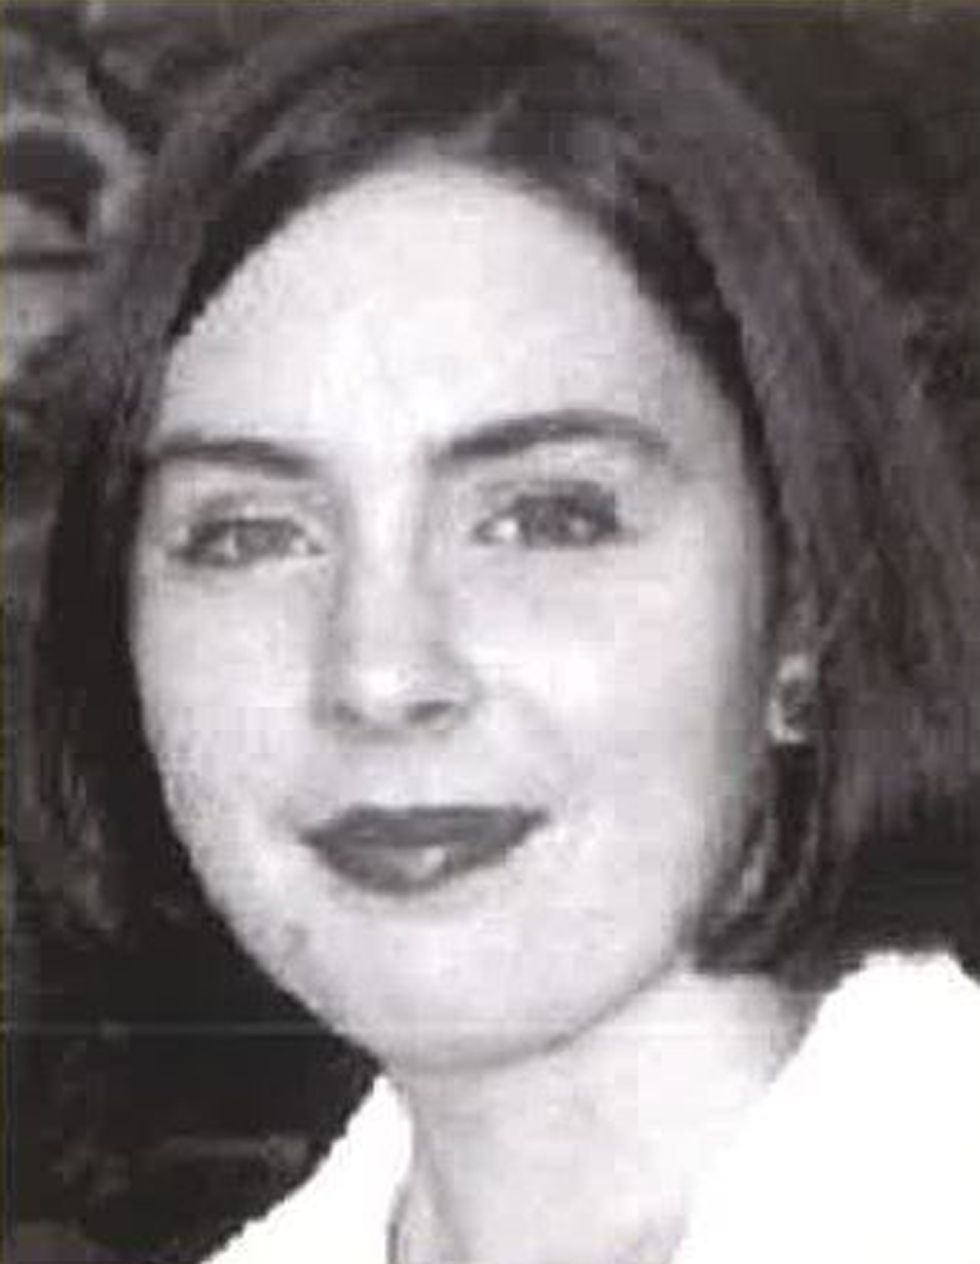 Ms Jacob was 18 years old when she disappeared in July 1998.